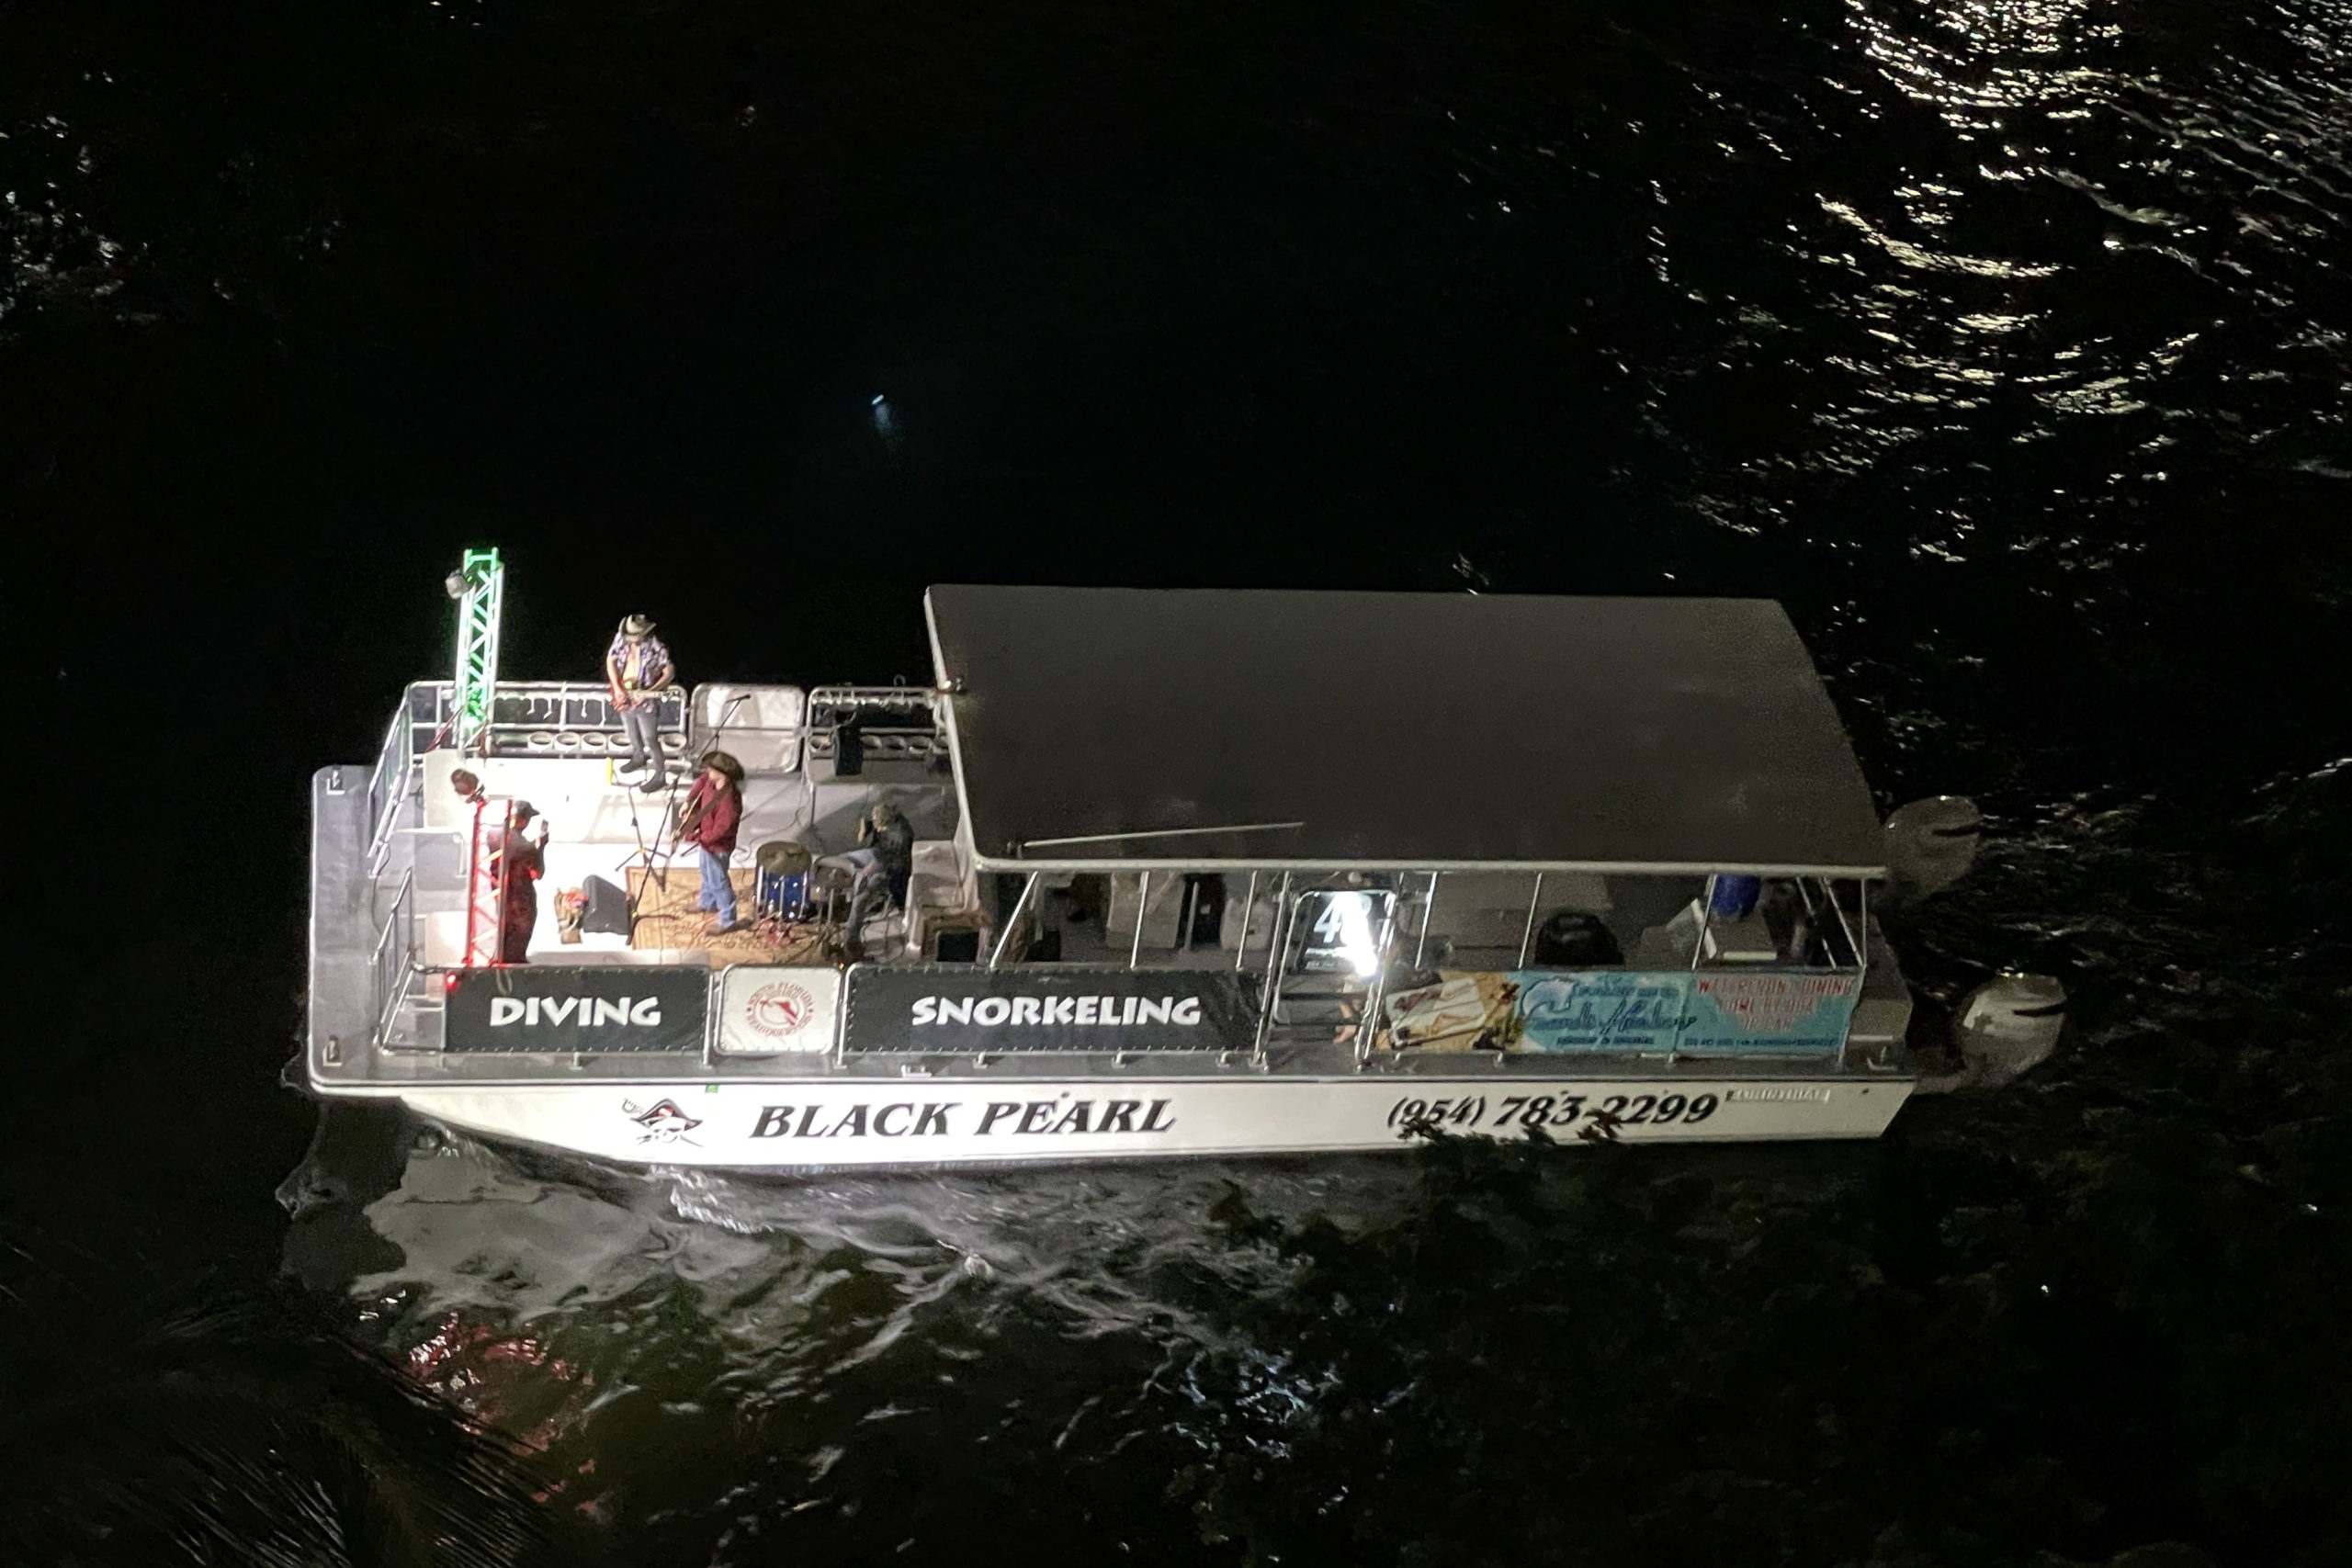 Ricky Valido & the Hialeah Hillbillies aboard Black Pearl, boat number 48 in the 2022 Winterfest Boat Parade